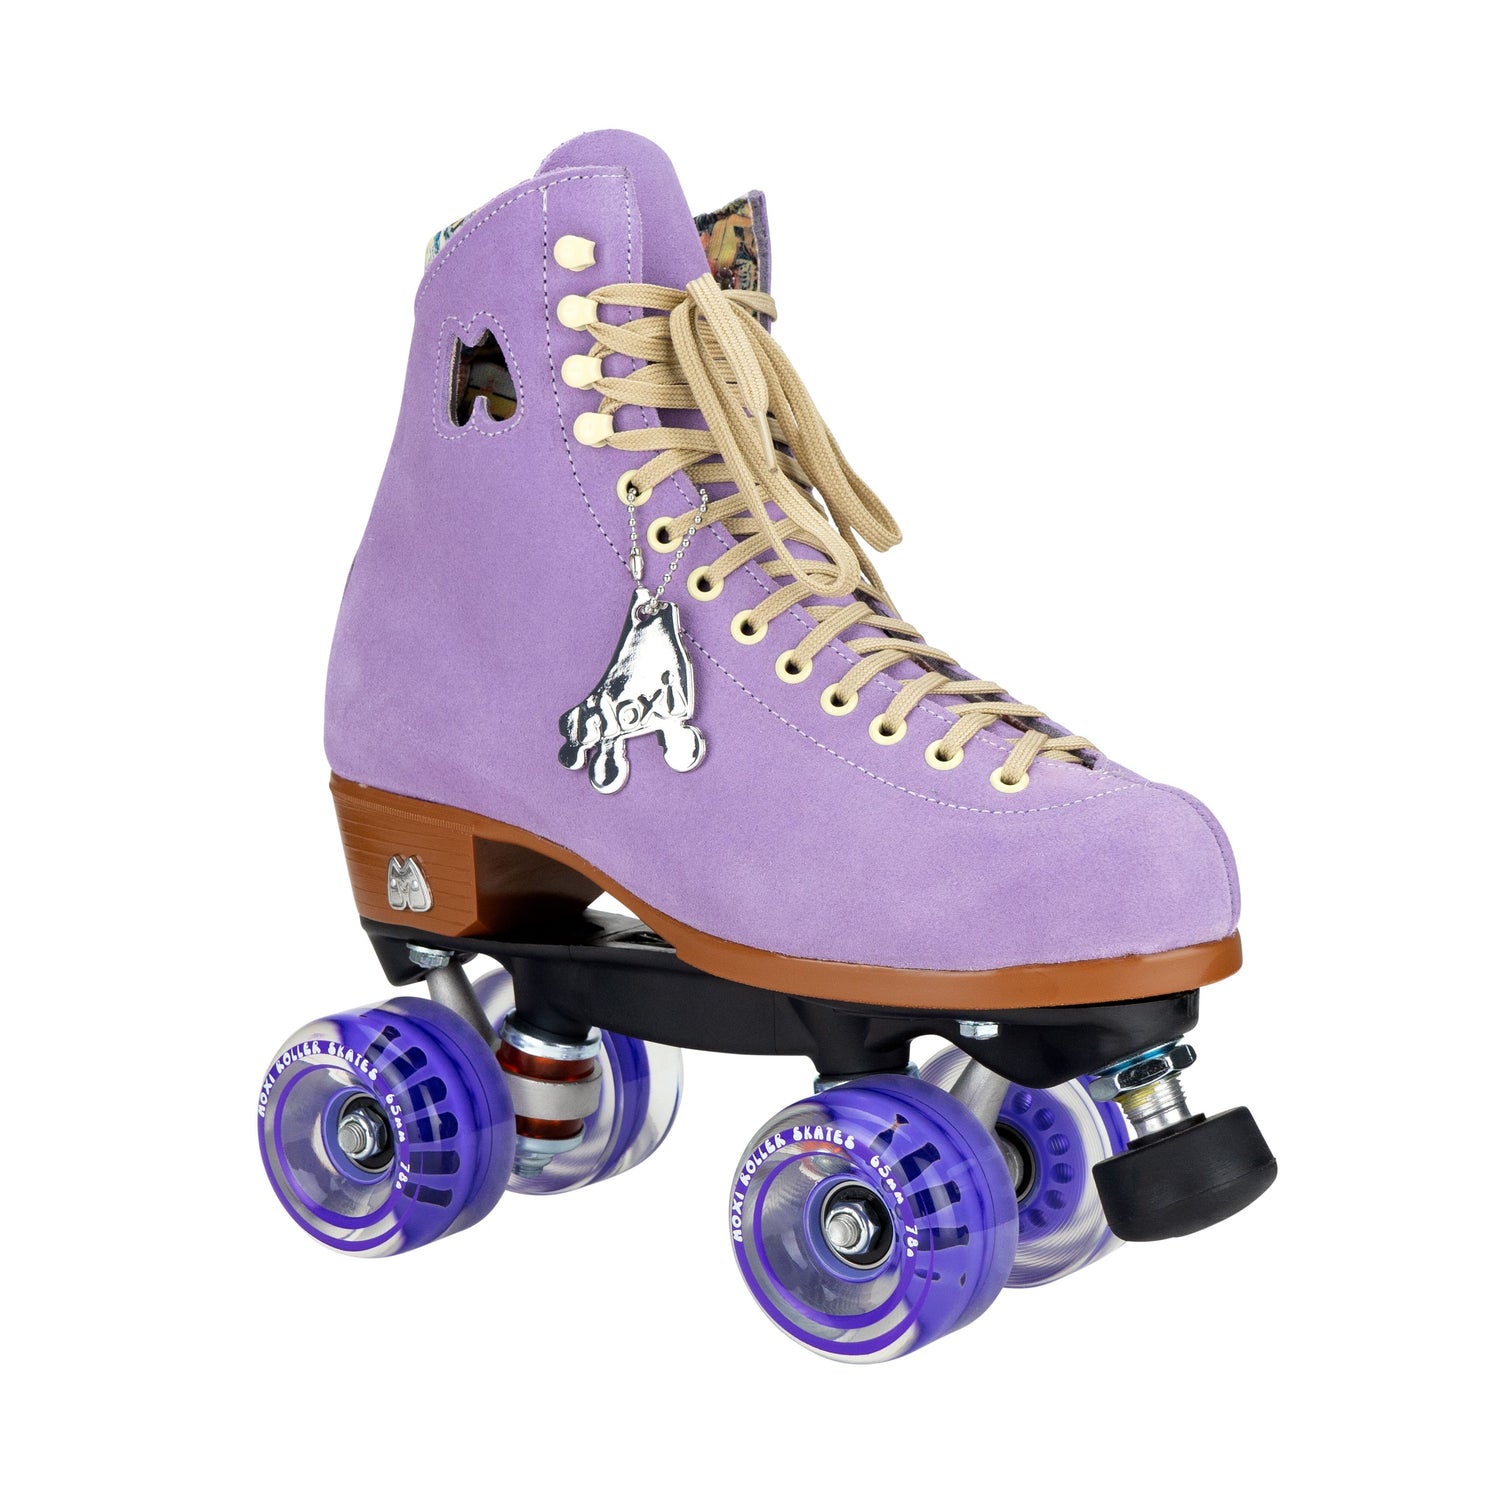 Come to Fresa's Roller Skate shop in Las Vegas and get your Moxi Lollys Skates.  These Lilac Moxi Lolly Roller Skates are ready to the outdoor. Cruise around Las Vegas Art District or come and skate in our indoor skate ramp.